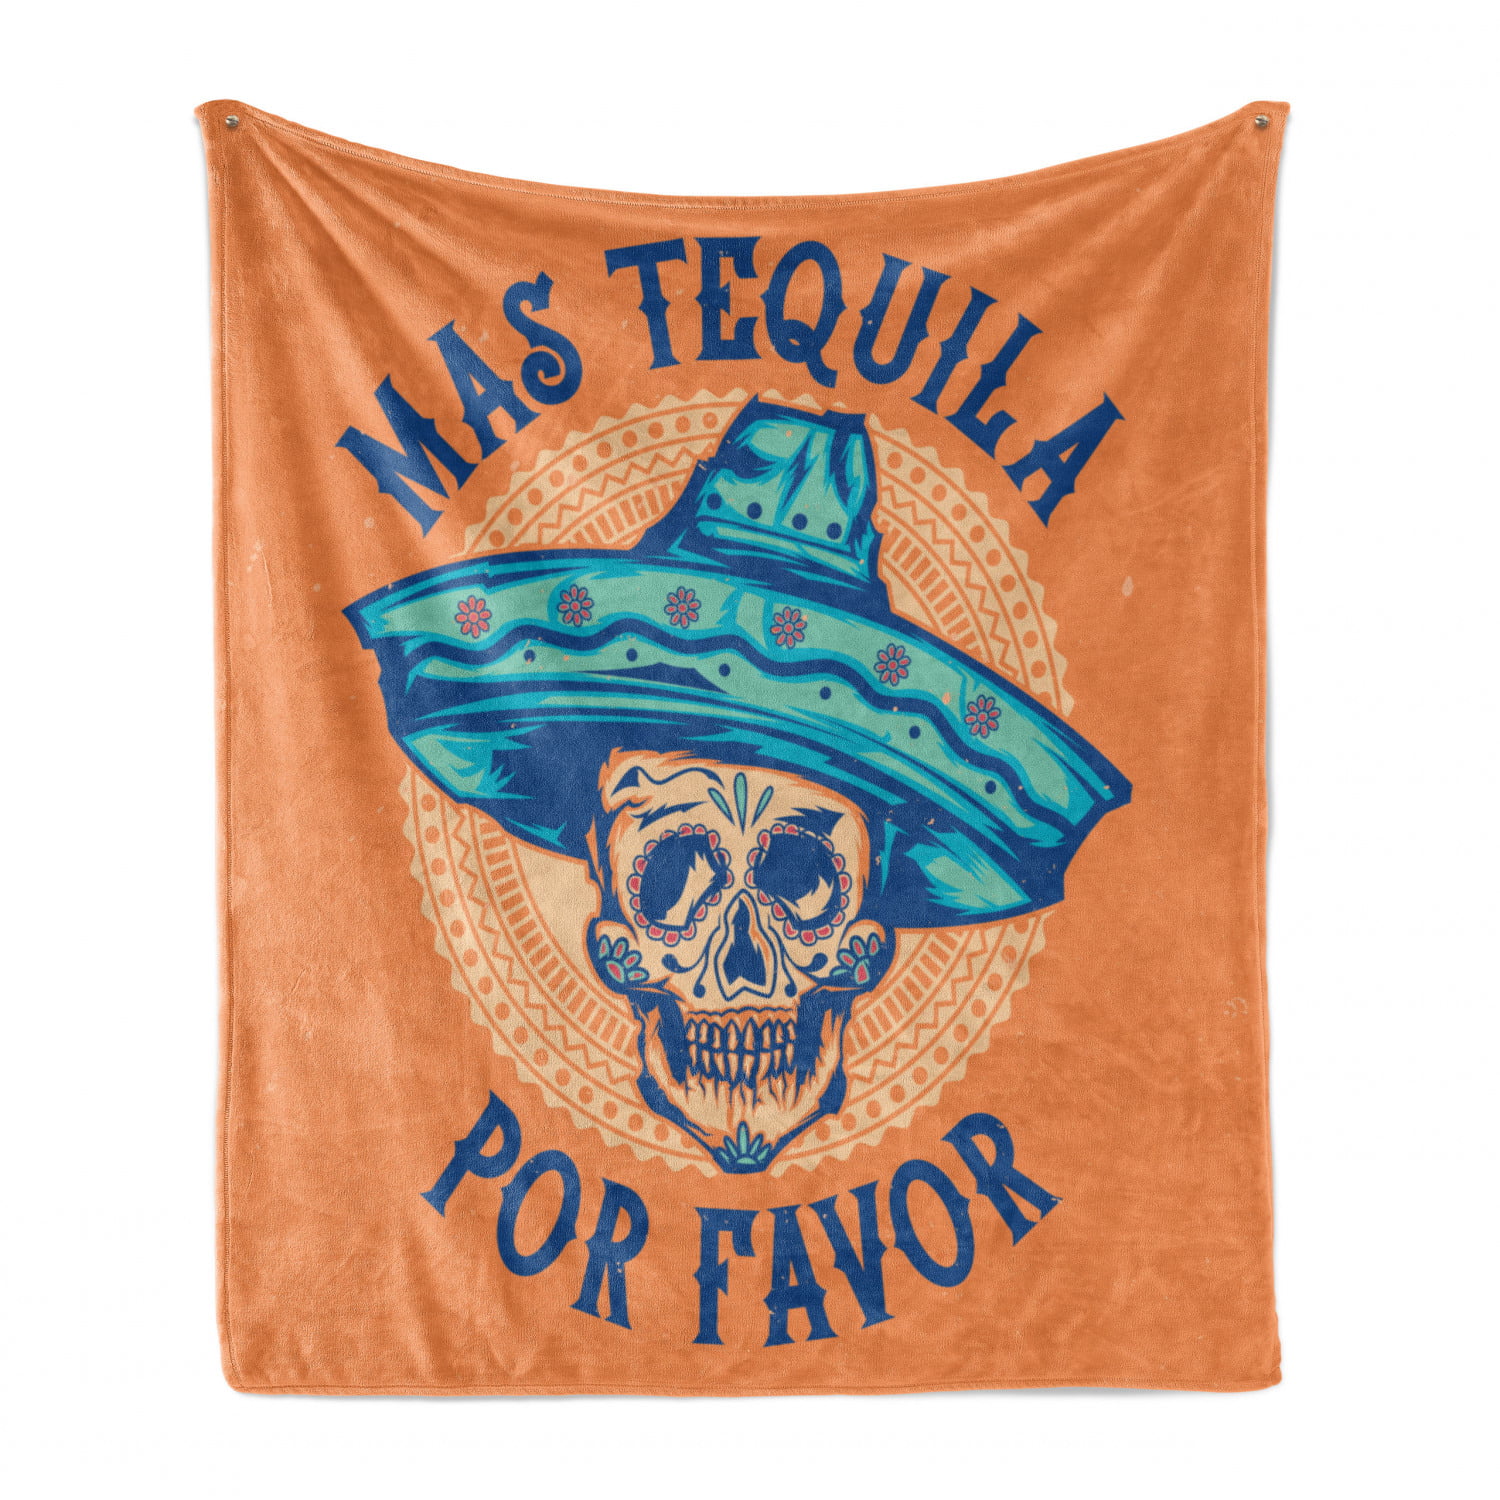 Hand-Drawn Sugar Skull Wearing Sombrero with Mas Tequila Por Favor Saying Cozy Plush for Indoor and Outdoor Use Ambesonne Alcohol Soft Flannel Fleece Throw Blanket Multicolor 60 x 80 